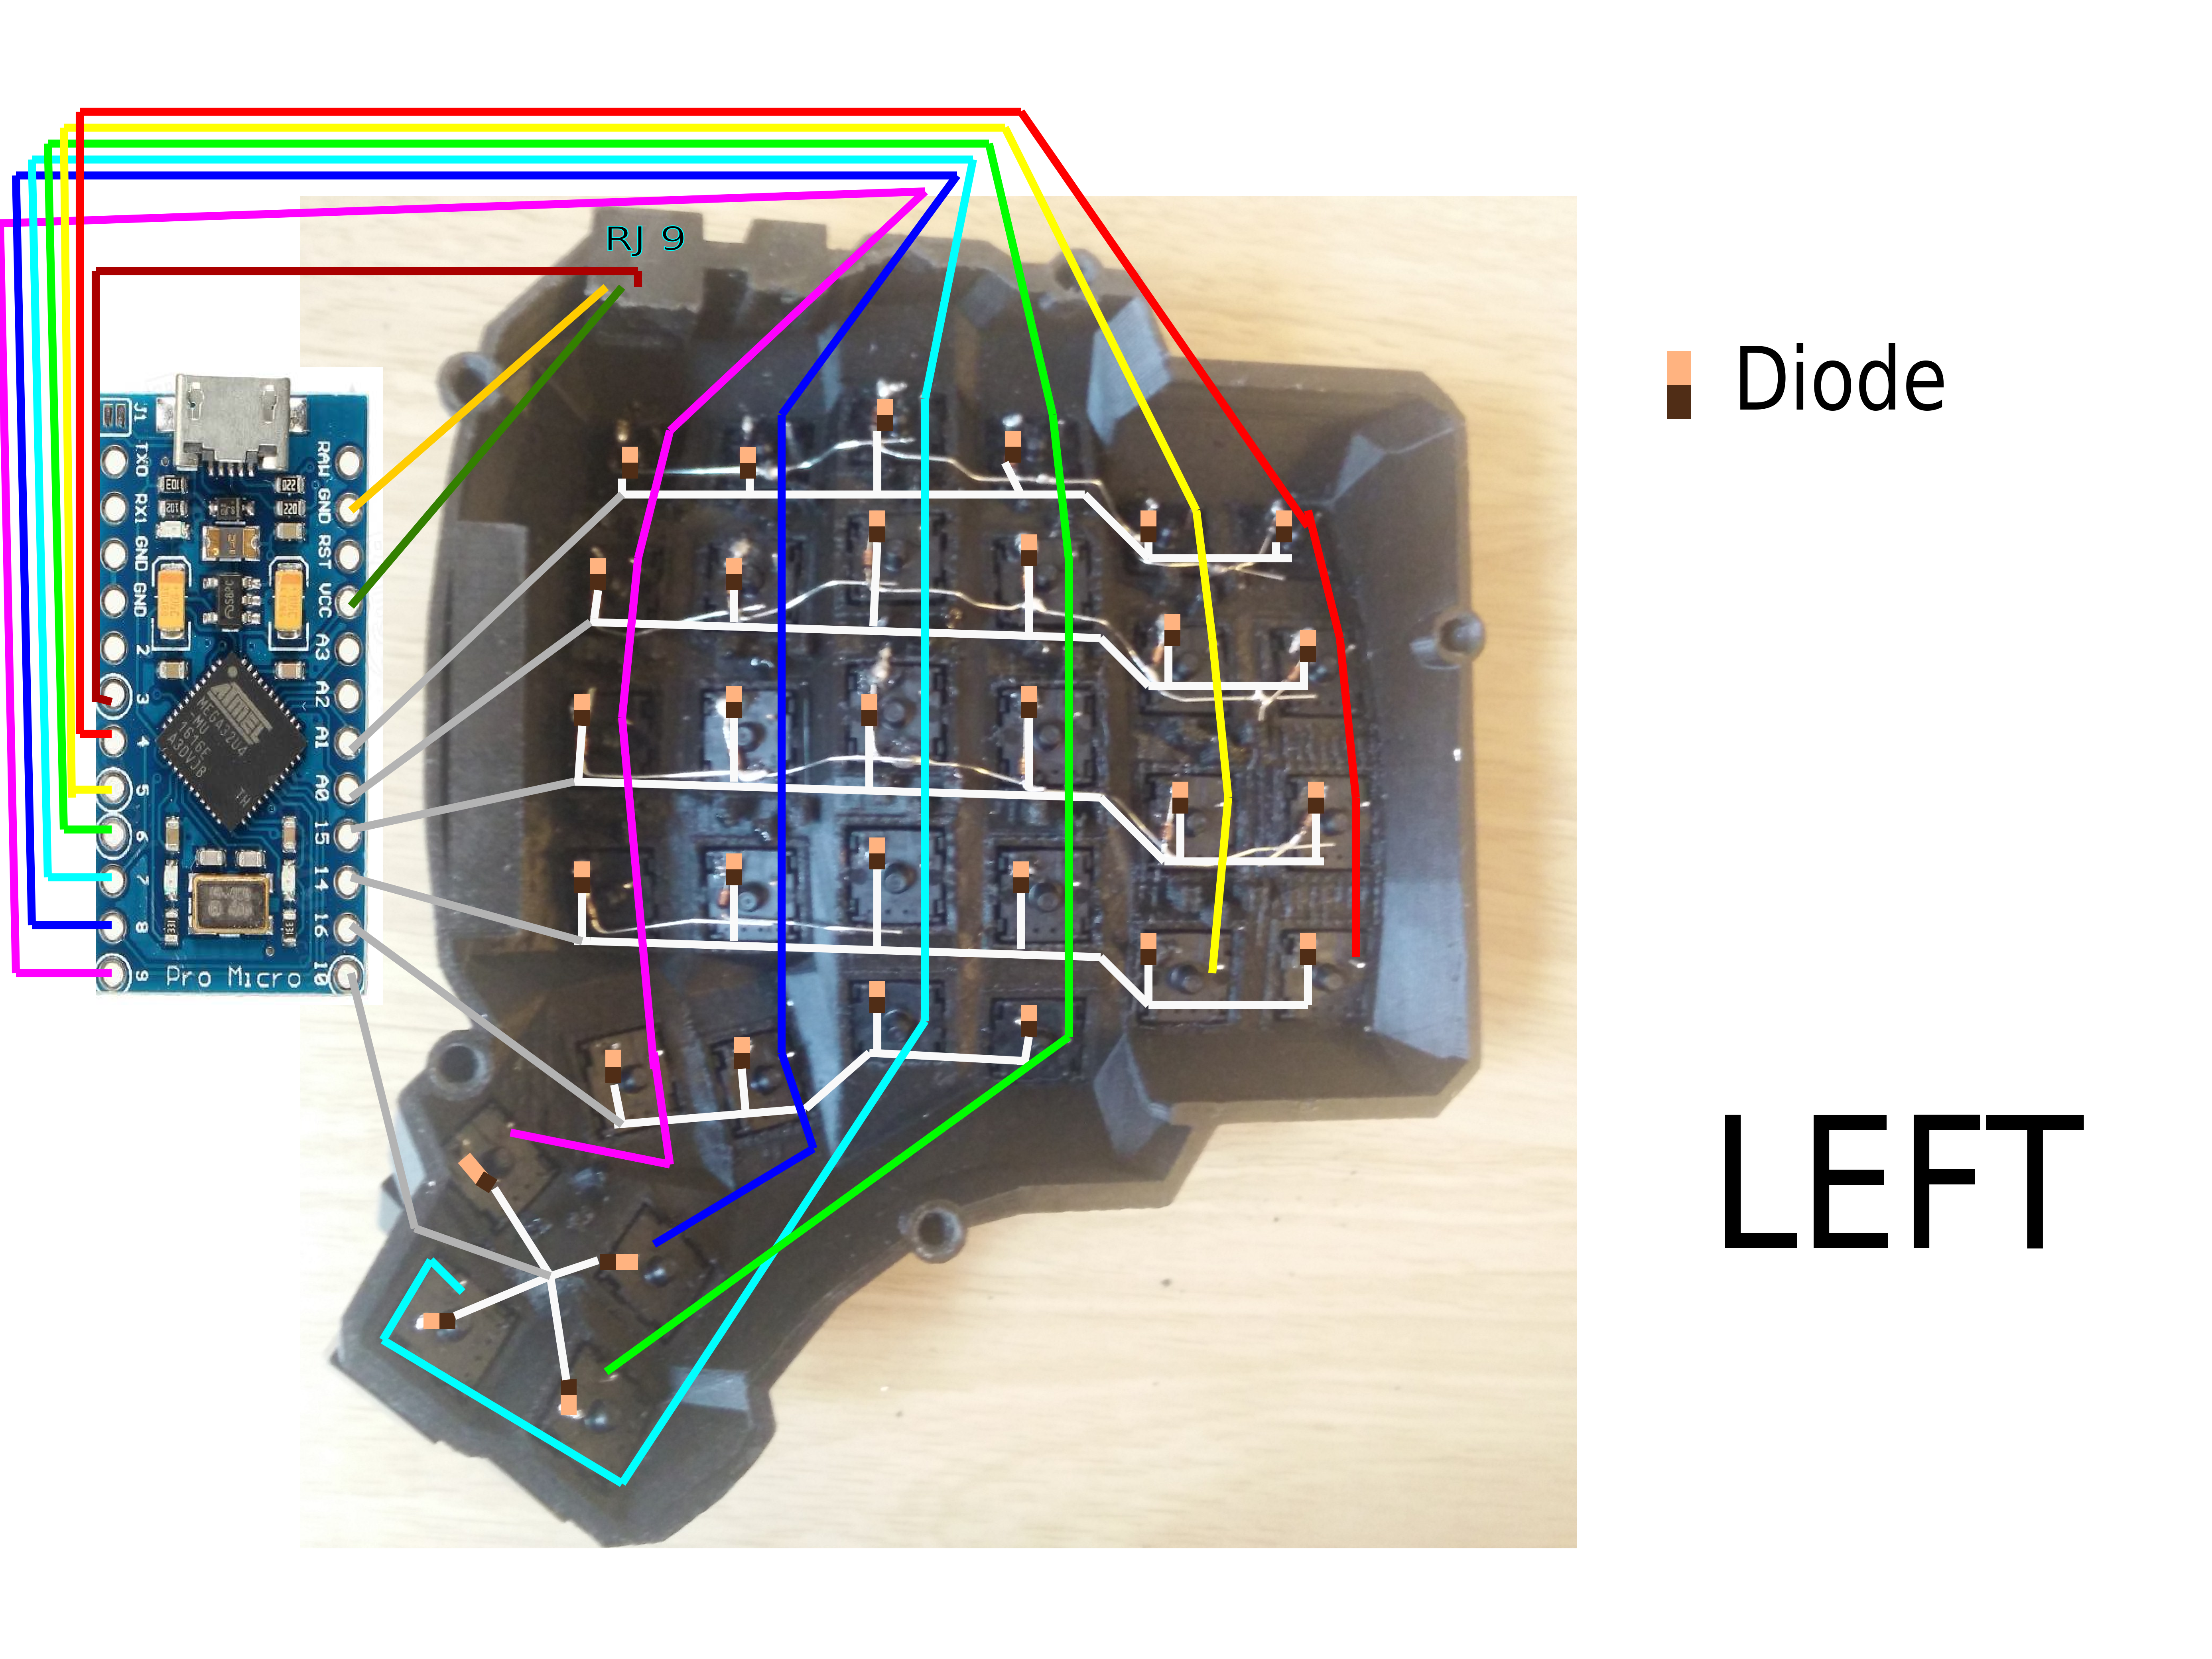 dactyl_manuform_left_wire_diagram.png